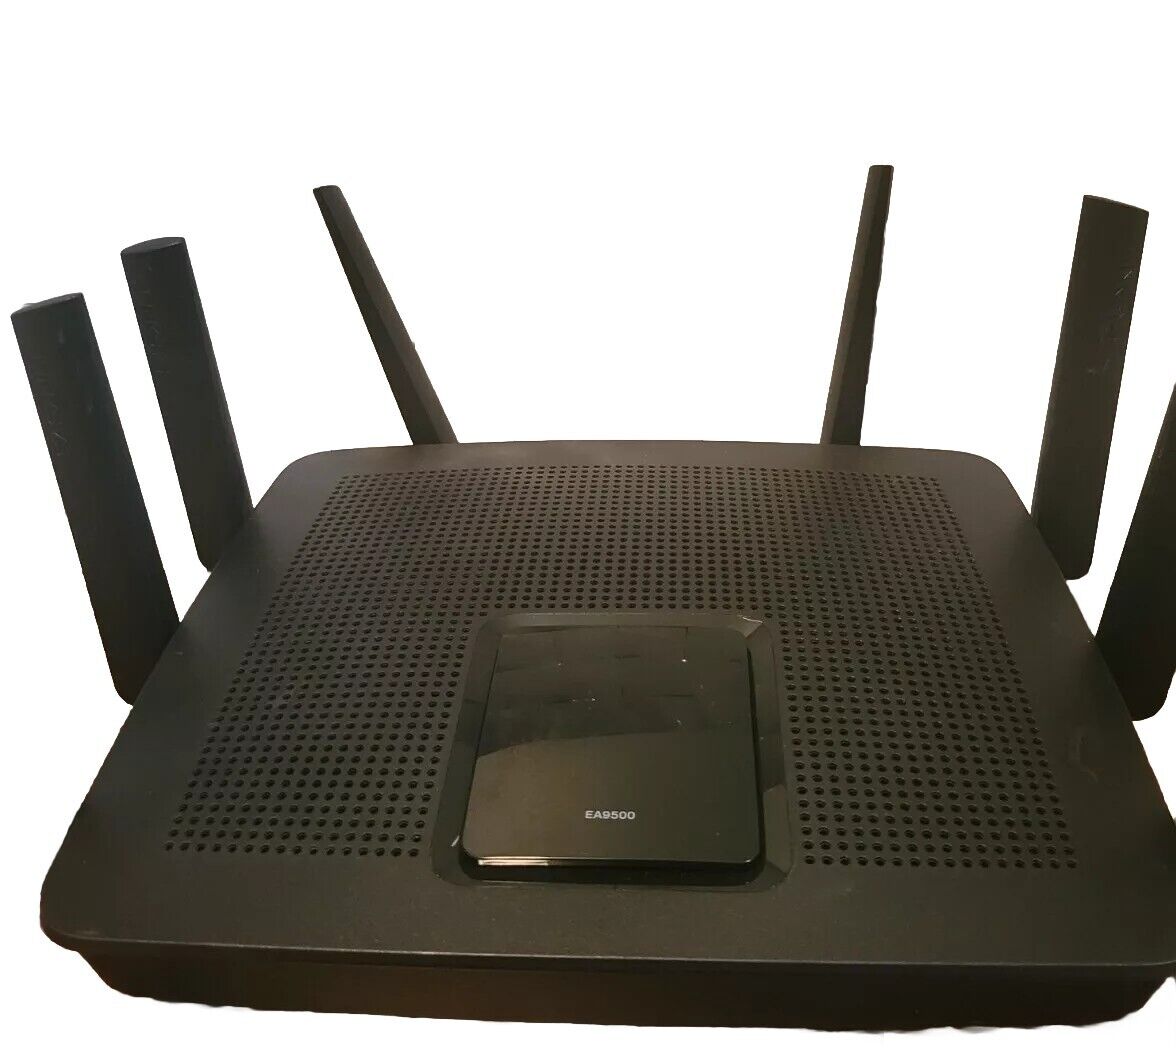 Linksys EA9500 V1.1 MAX-STREAM Gigabit Router, WiFi speeds up to 5.3 Gbp. READ